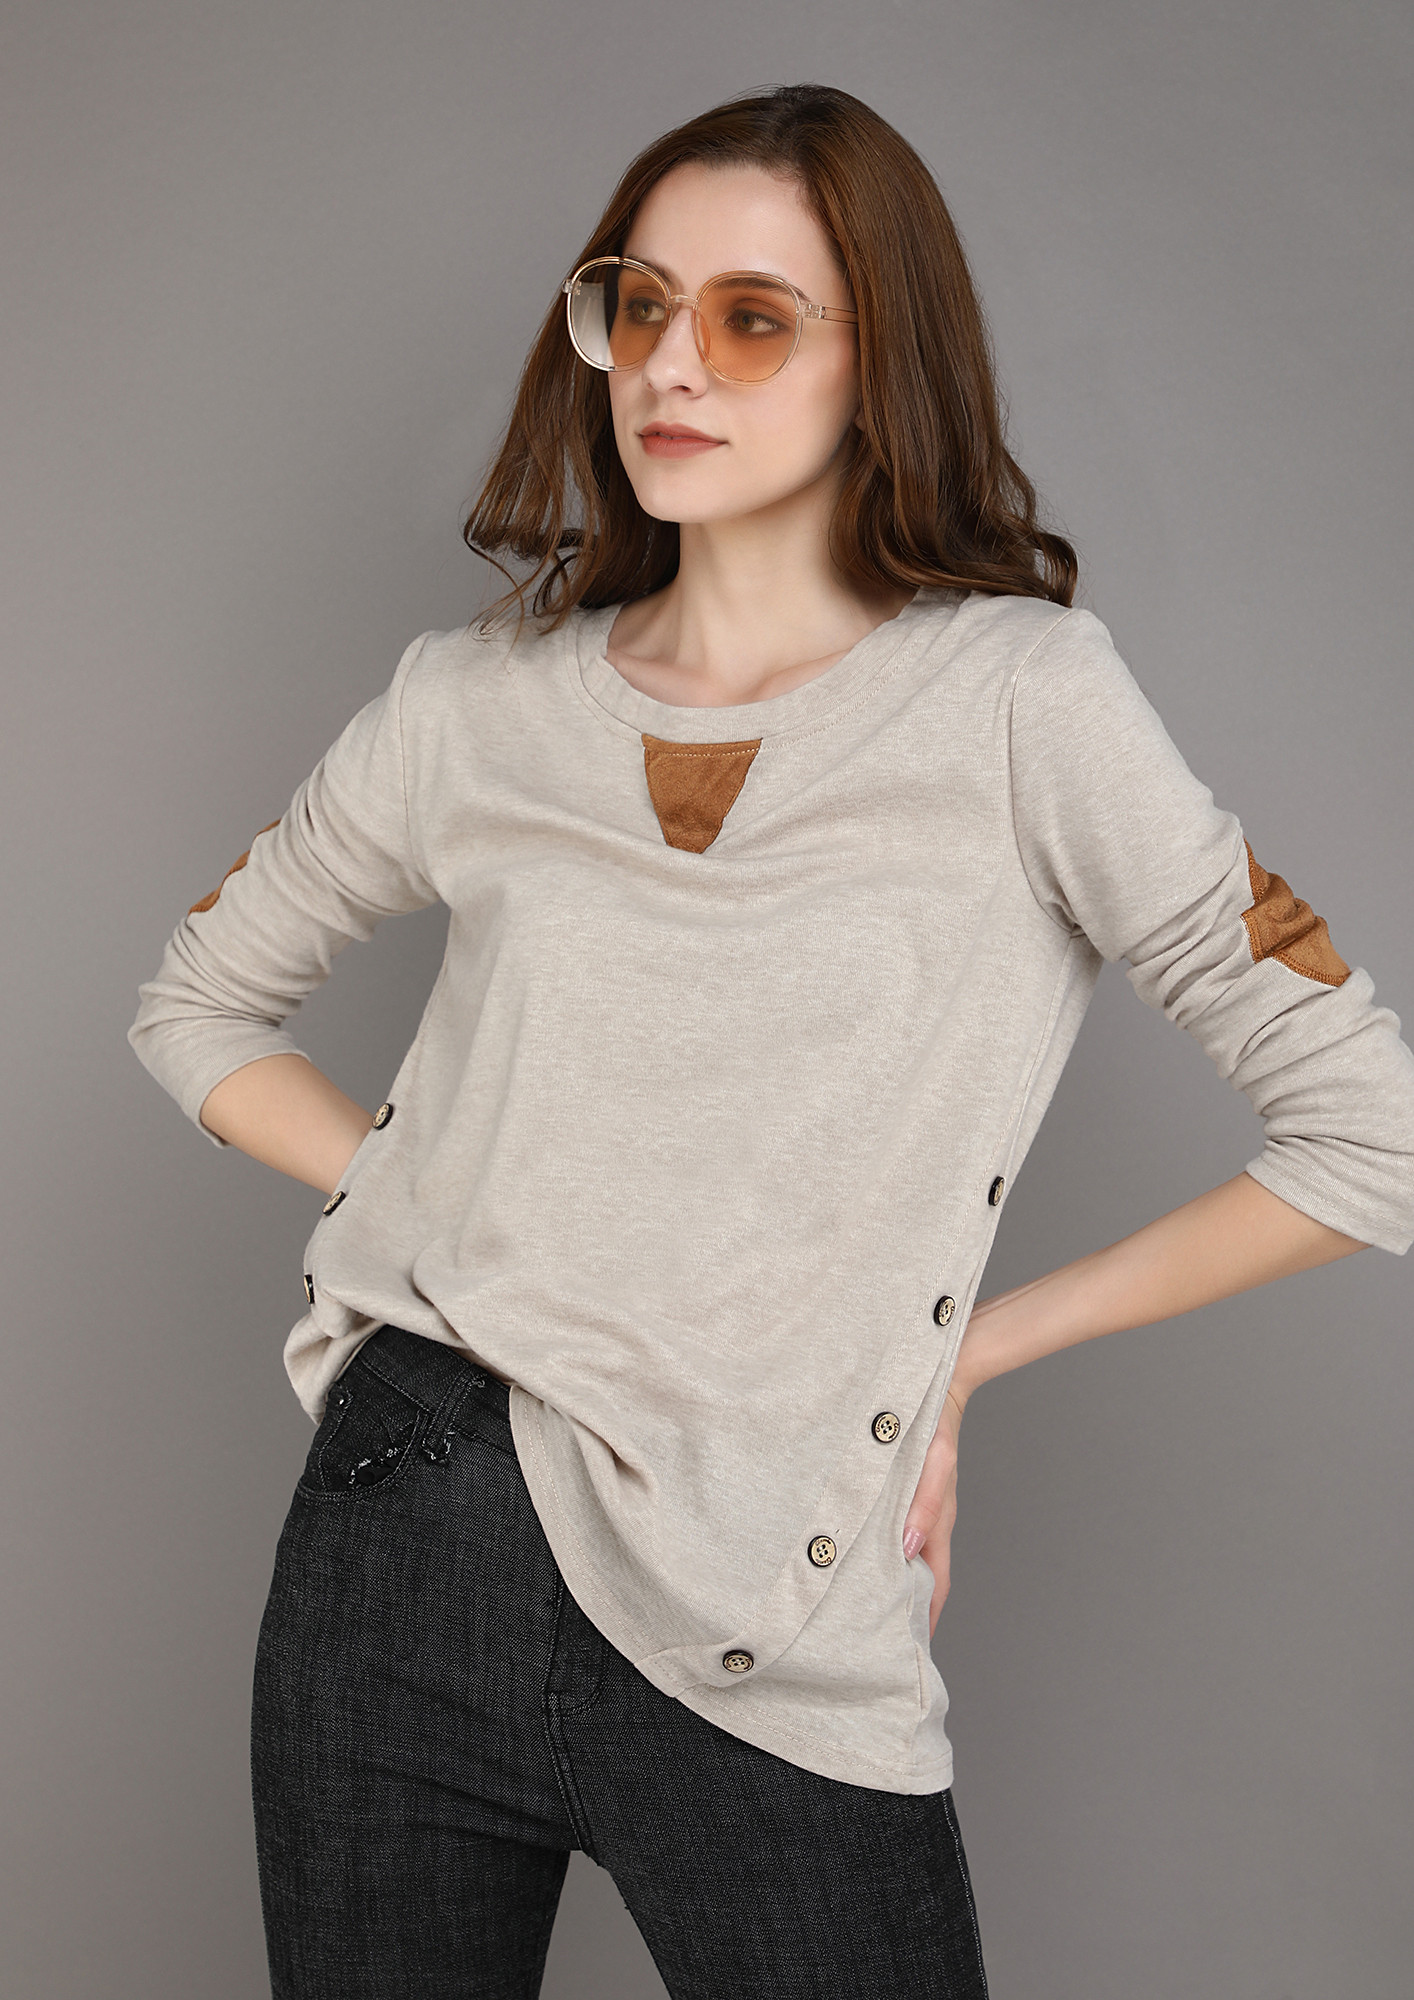 COMFORTABLY YOURS APRICOT TOP